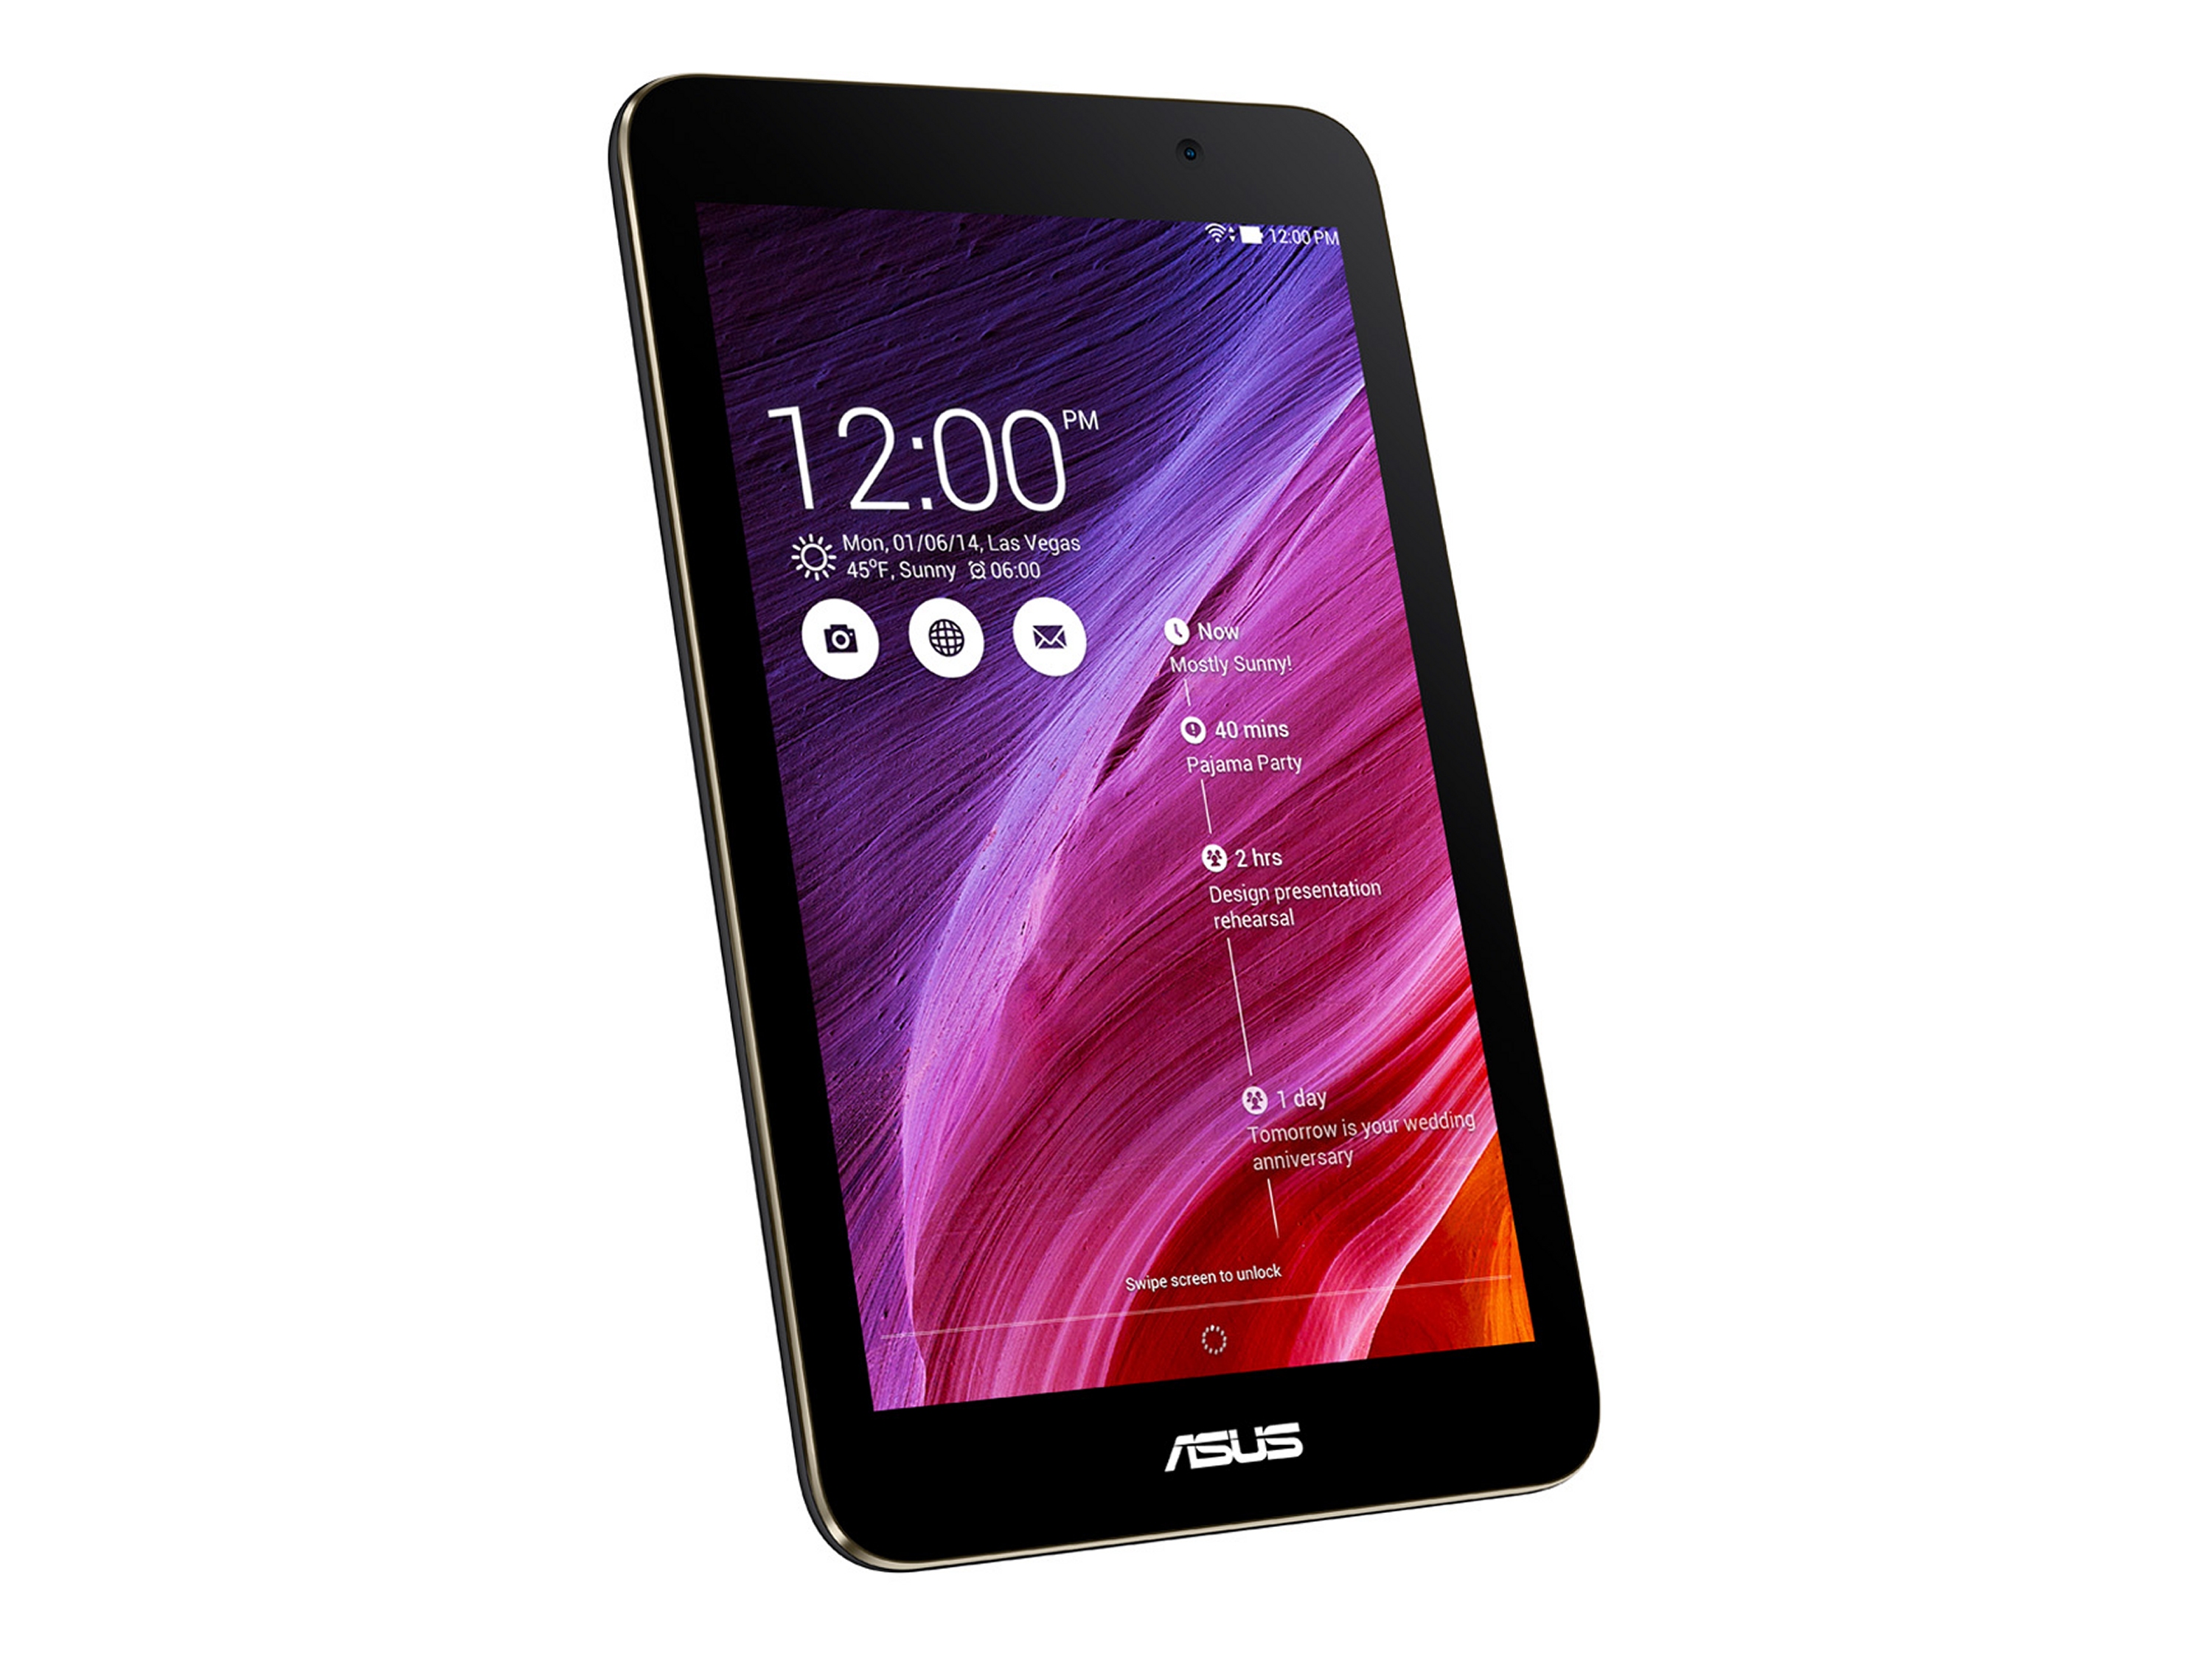 Asus Memo Pad Hd 7 Me176c Tablet Review Notebookcheck Net Reviews